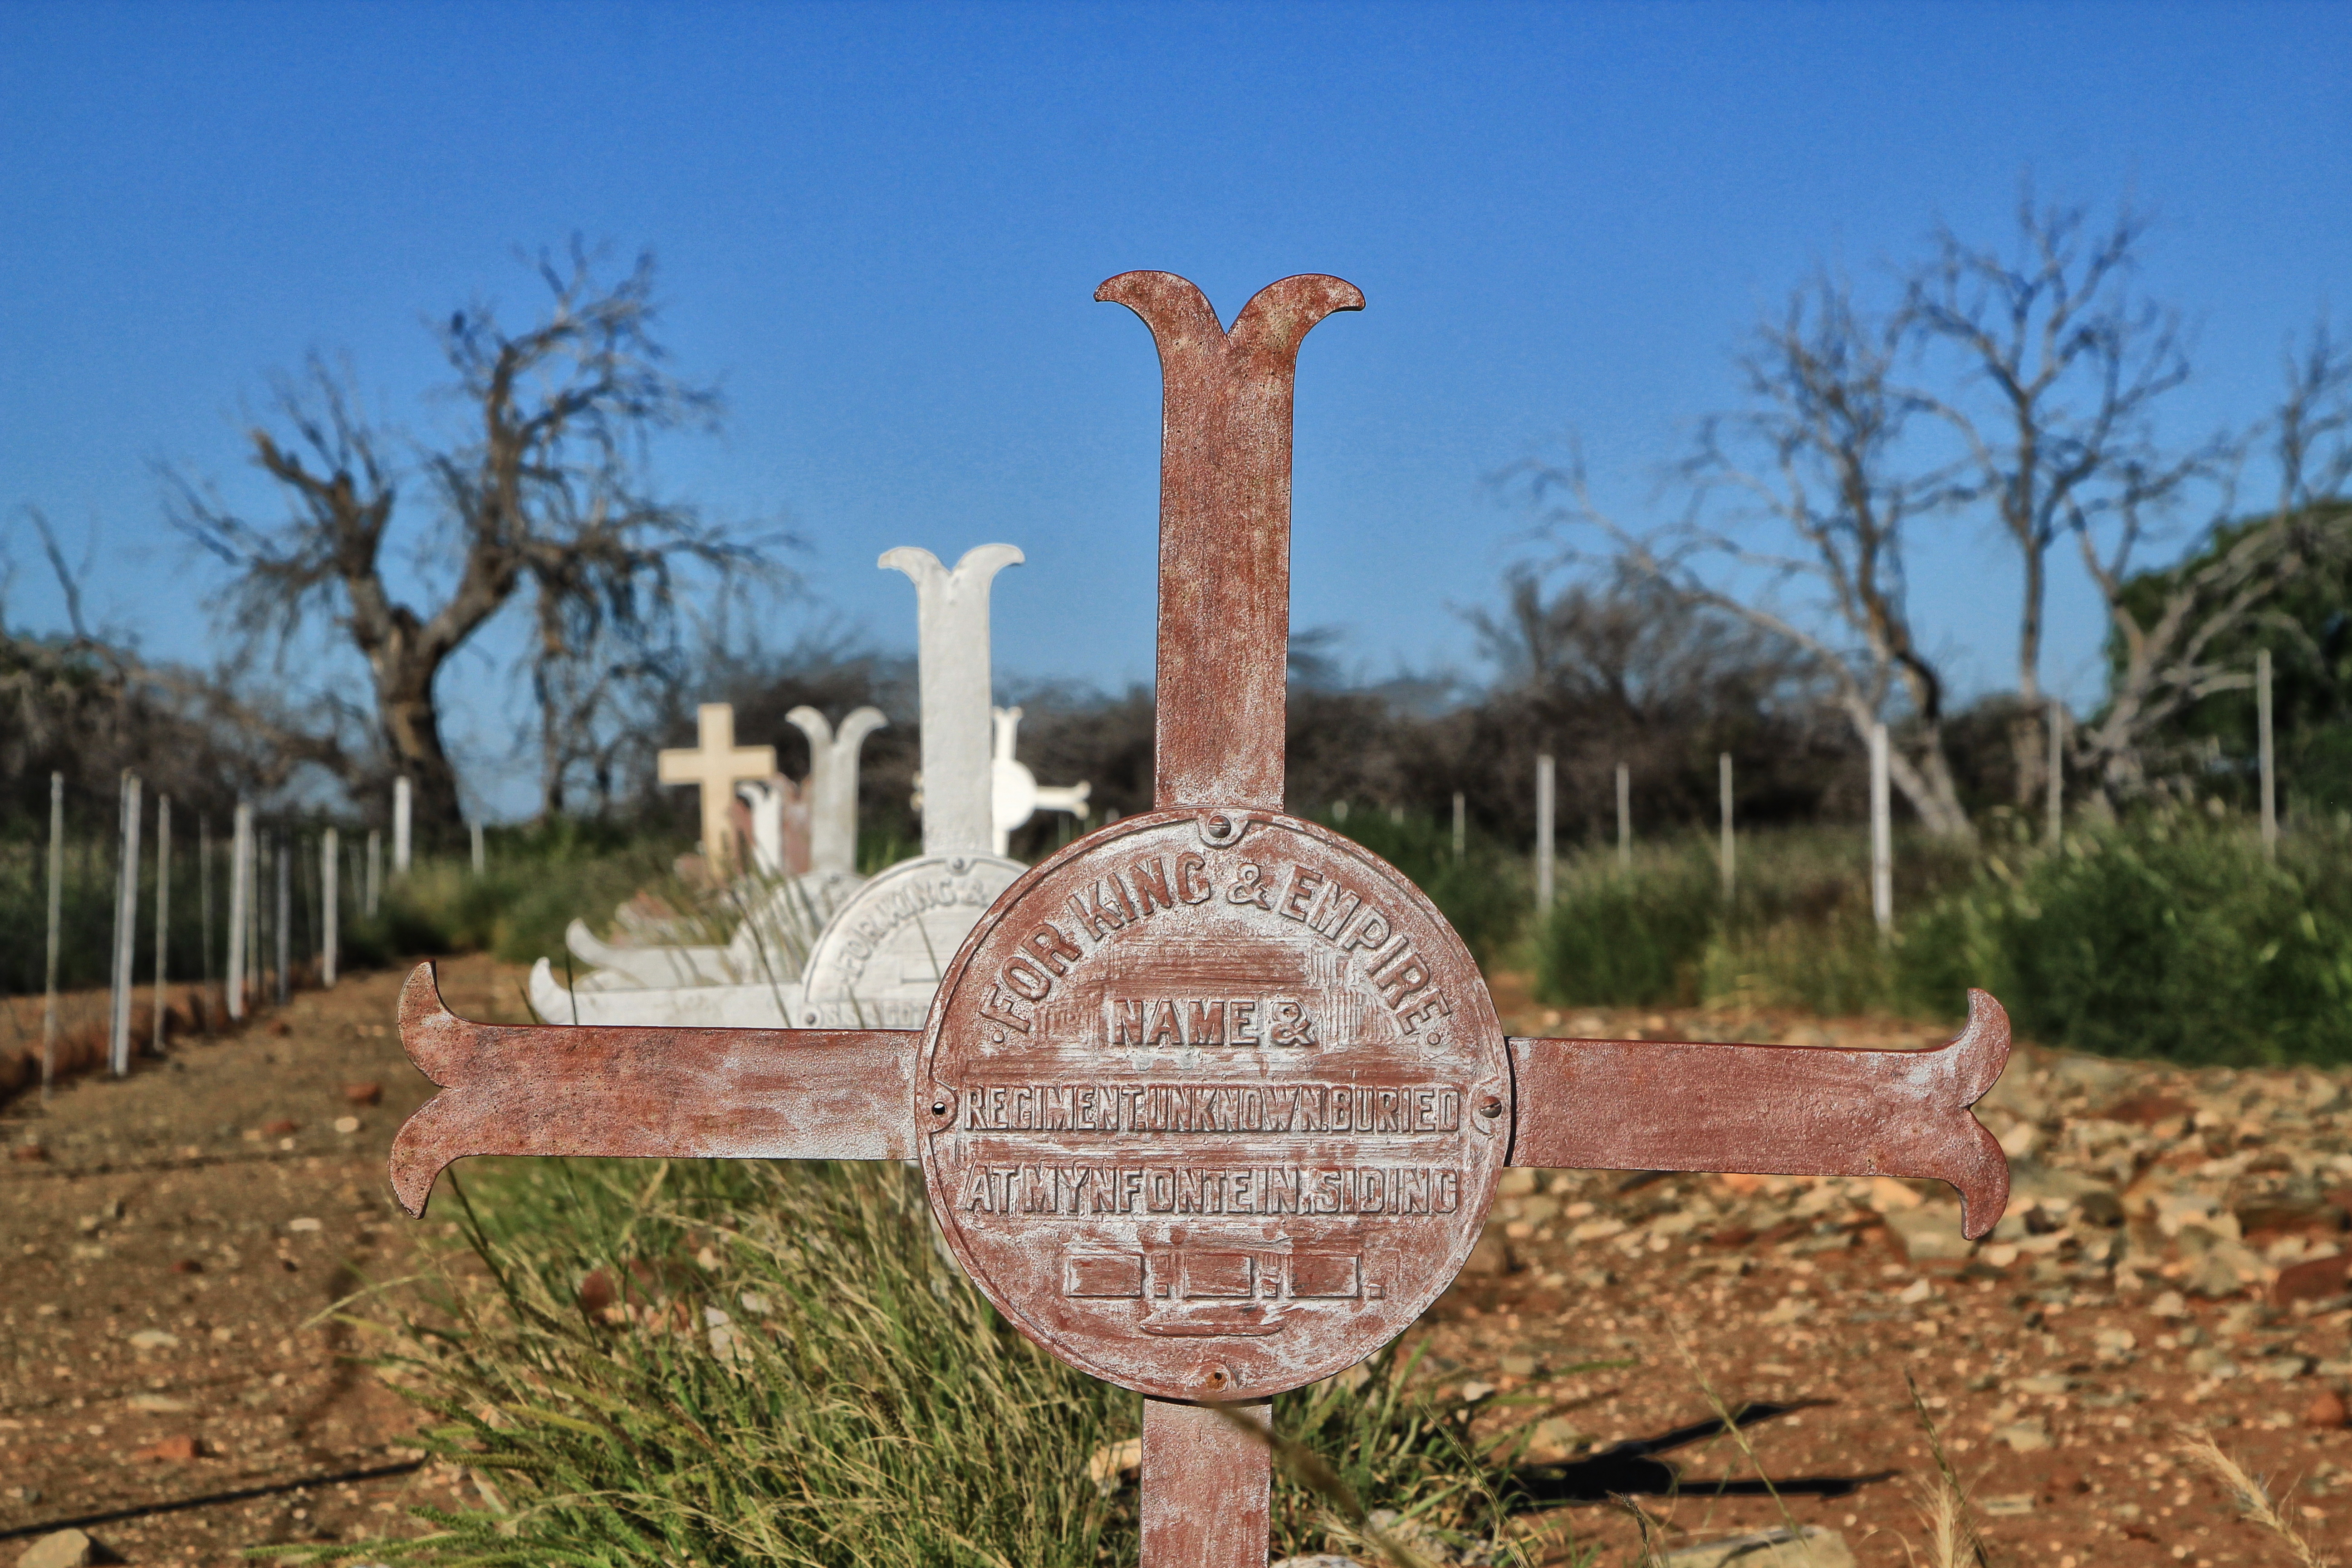 The last signs of the British Empire could one day be a forgotten British grave in the Karoo.